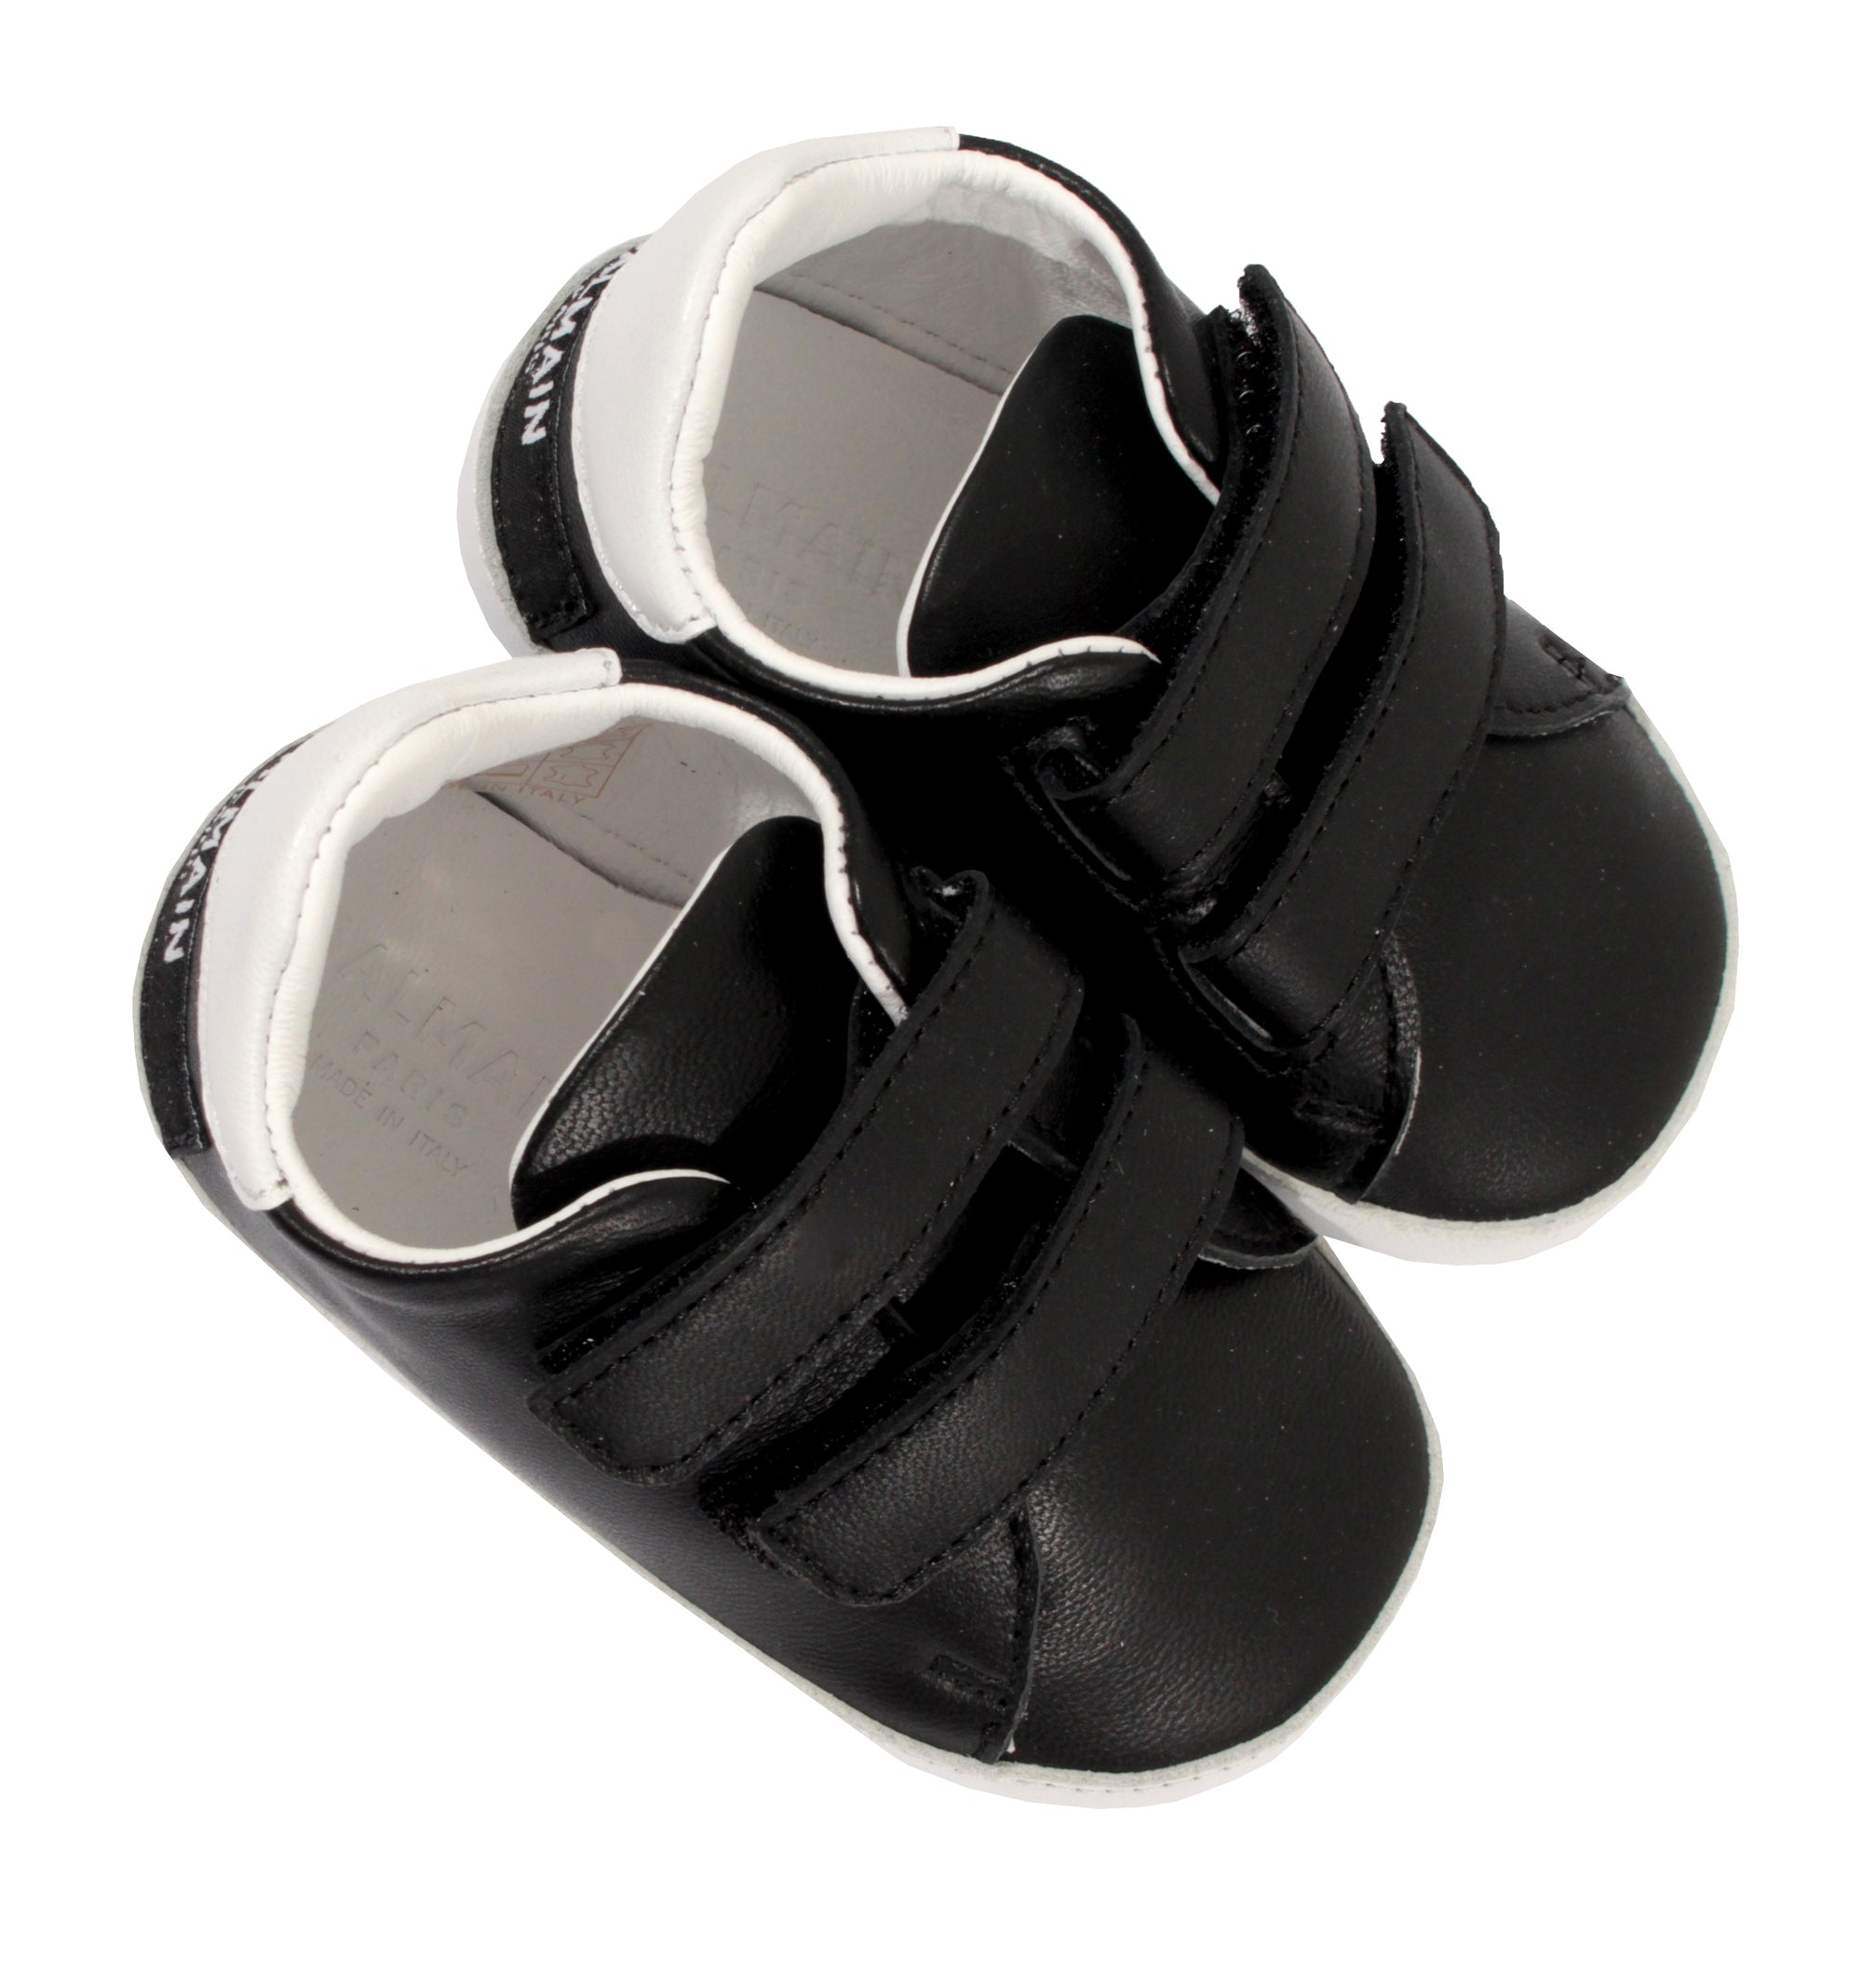 Crib Shoes With Contrast Soles - Black & White